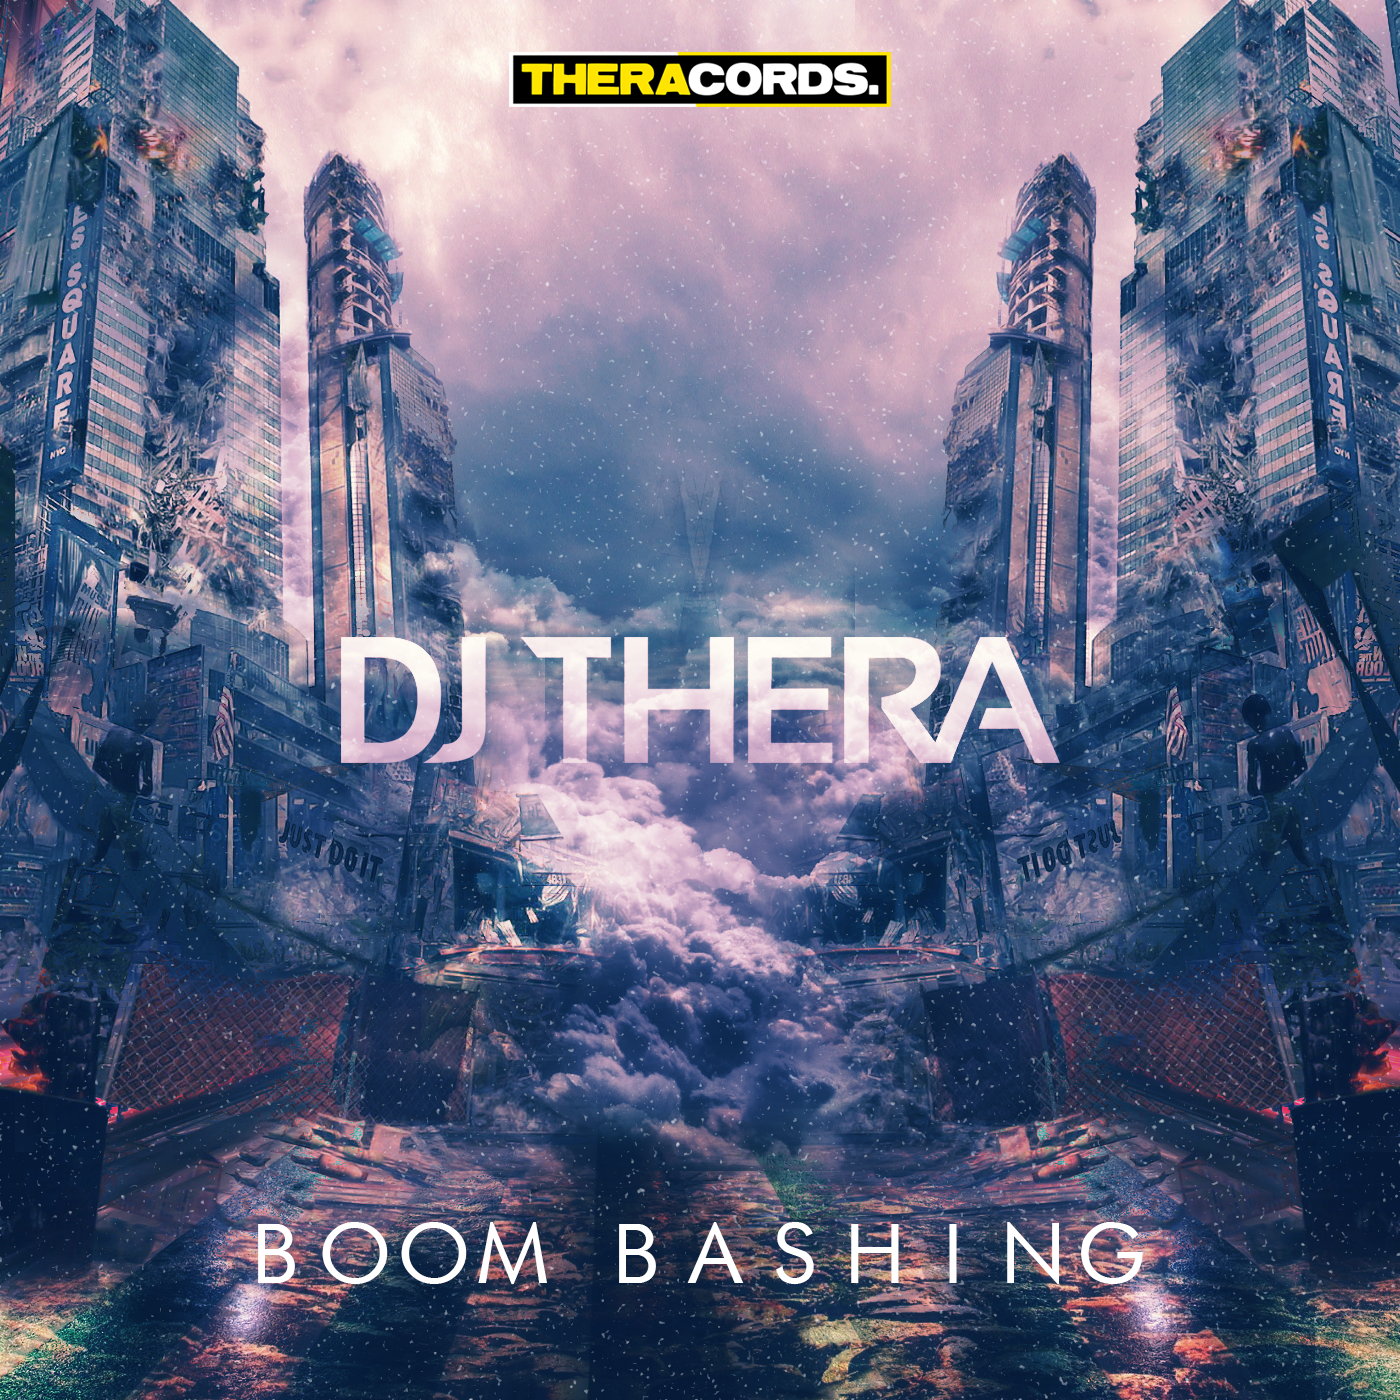 Dj Thera - Boom Bashing [THERACORDS]  THER-115